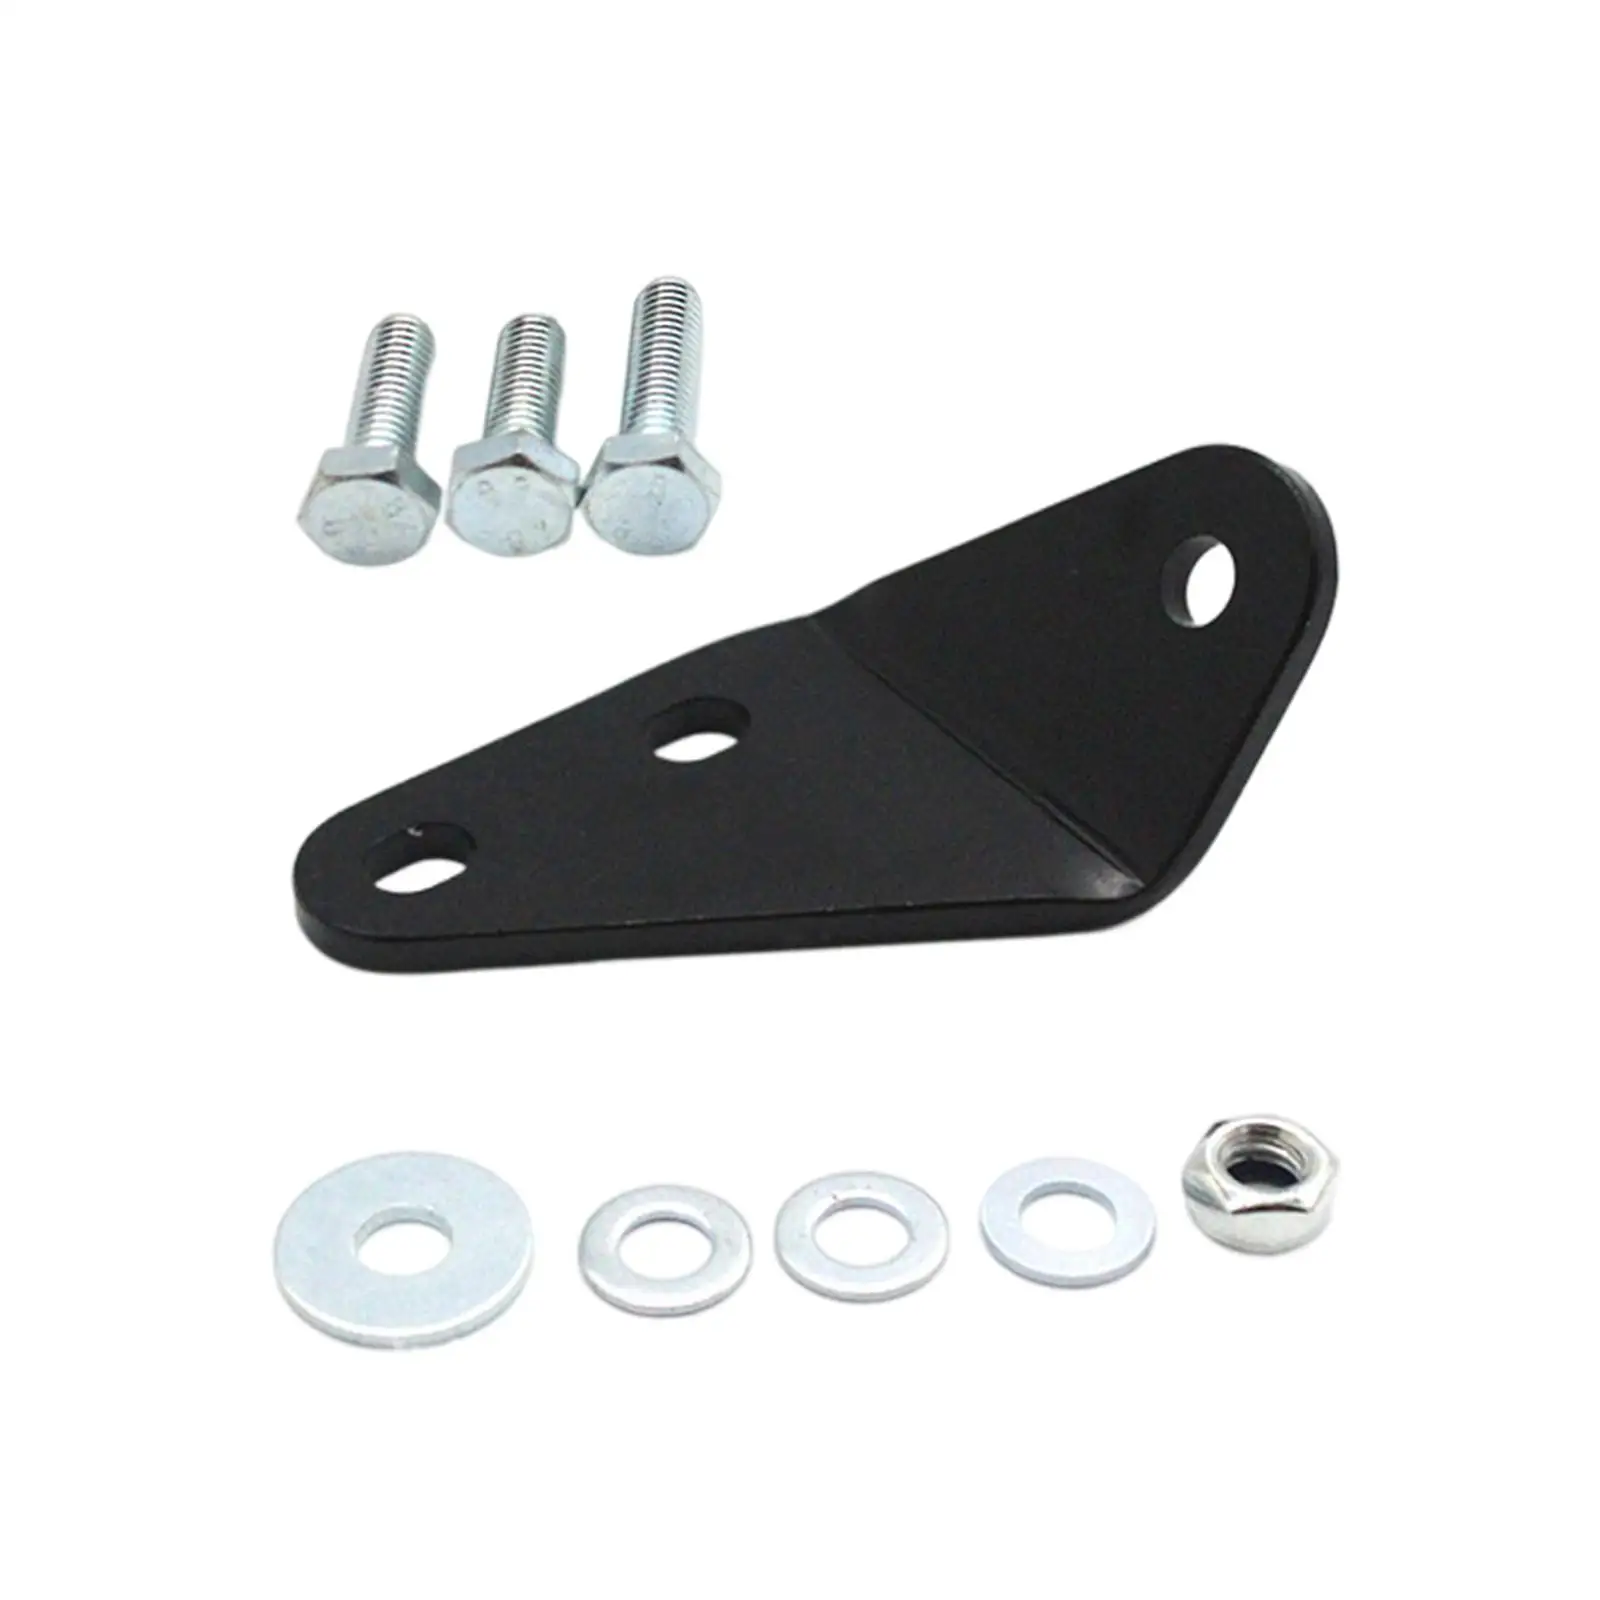 Clutch Pedal Repair Bracket Kit Easy Installation Replace Durable for Volkswagen T4 Transporter Caravelle Accessories